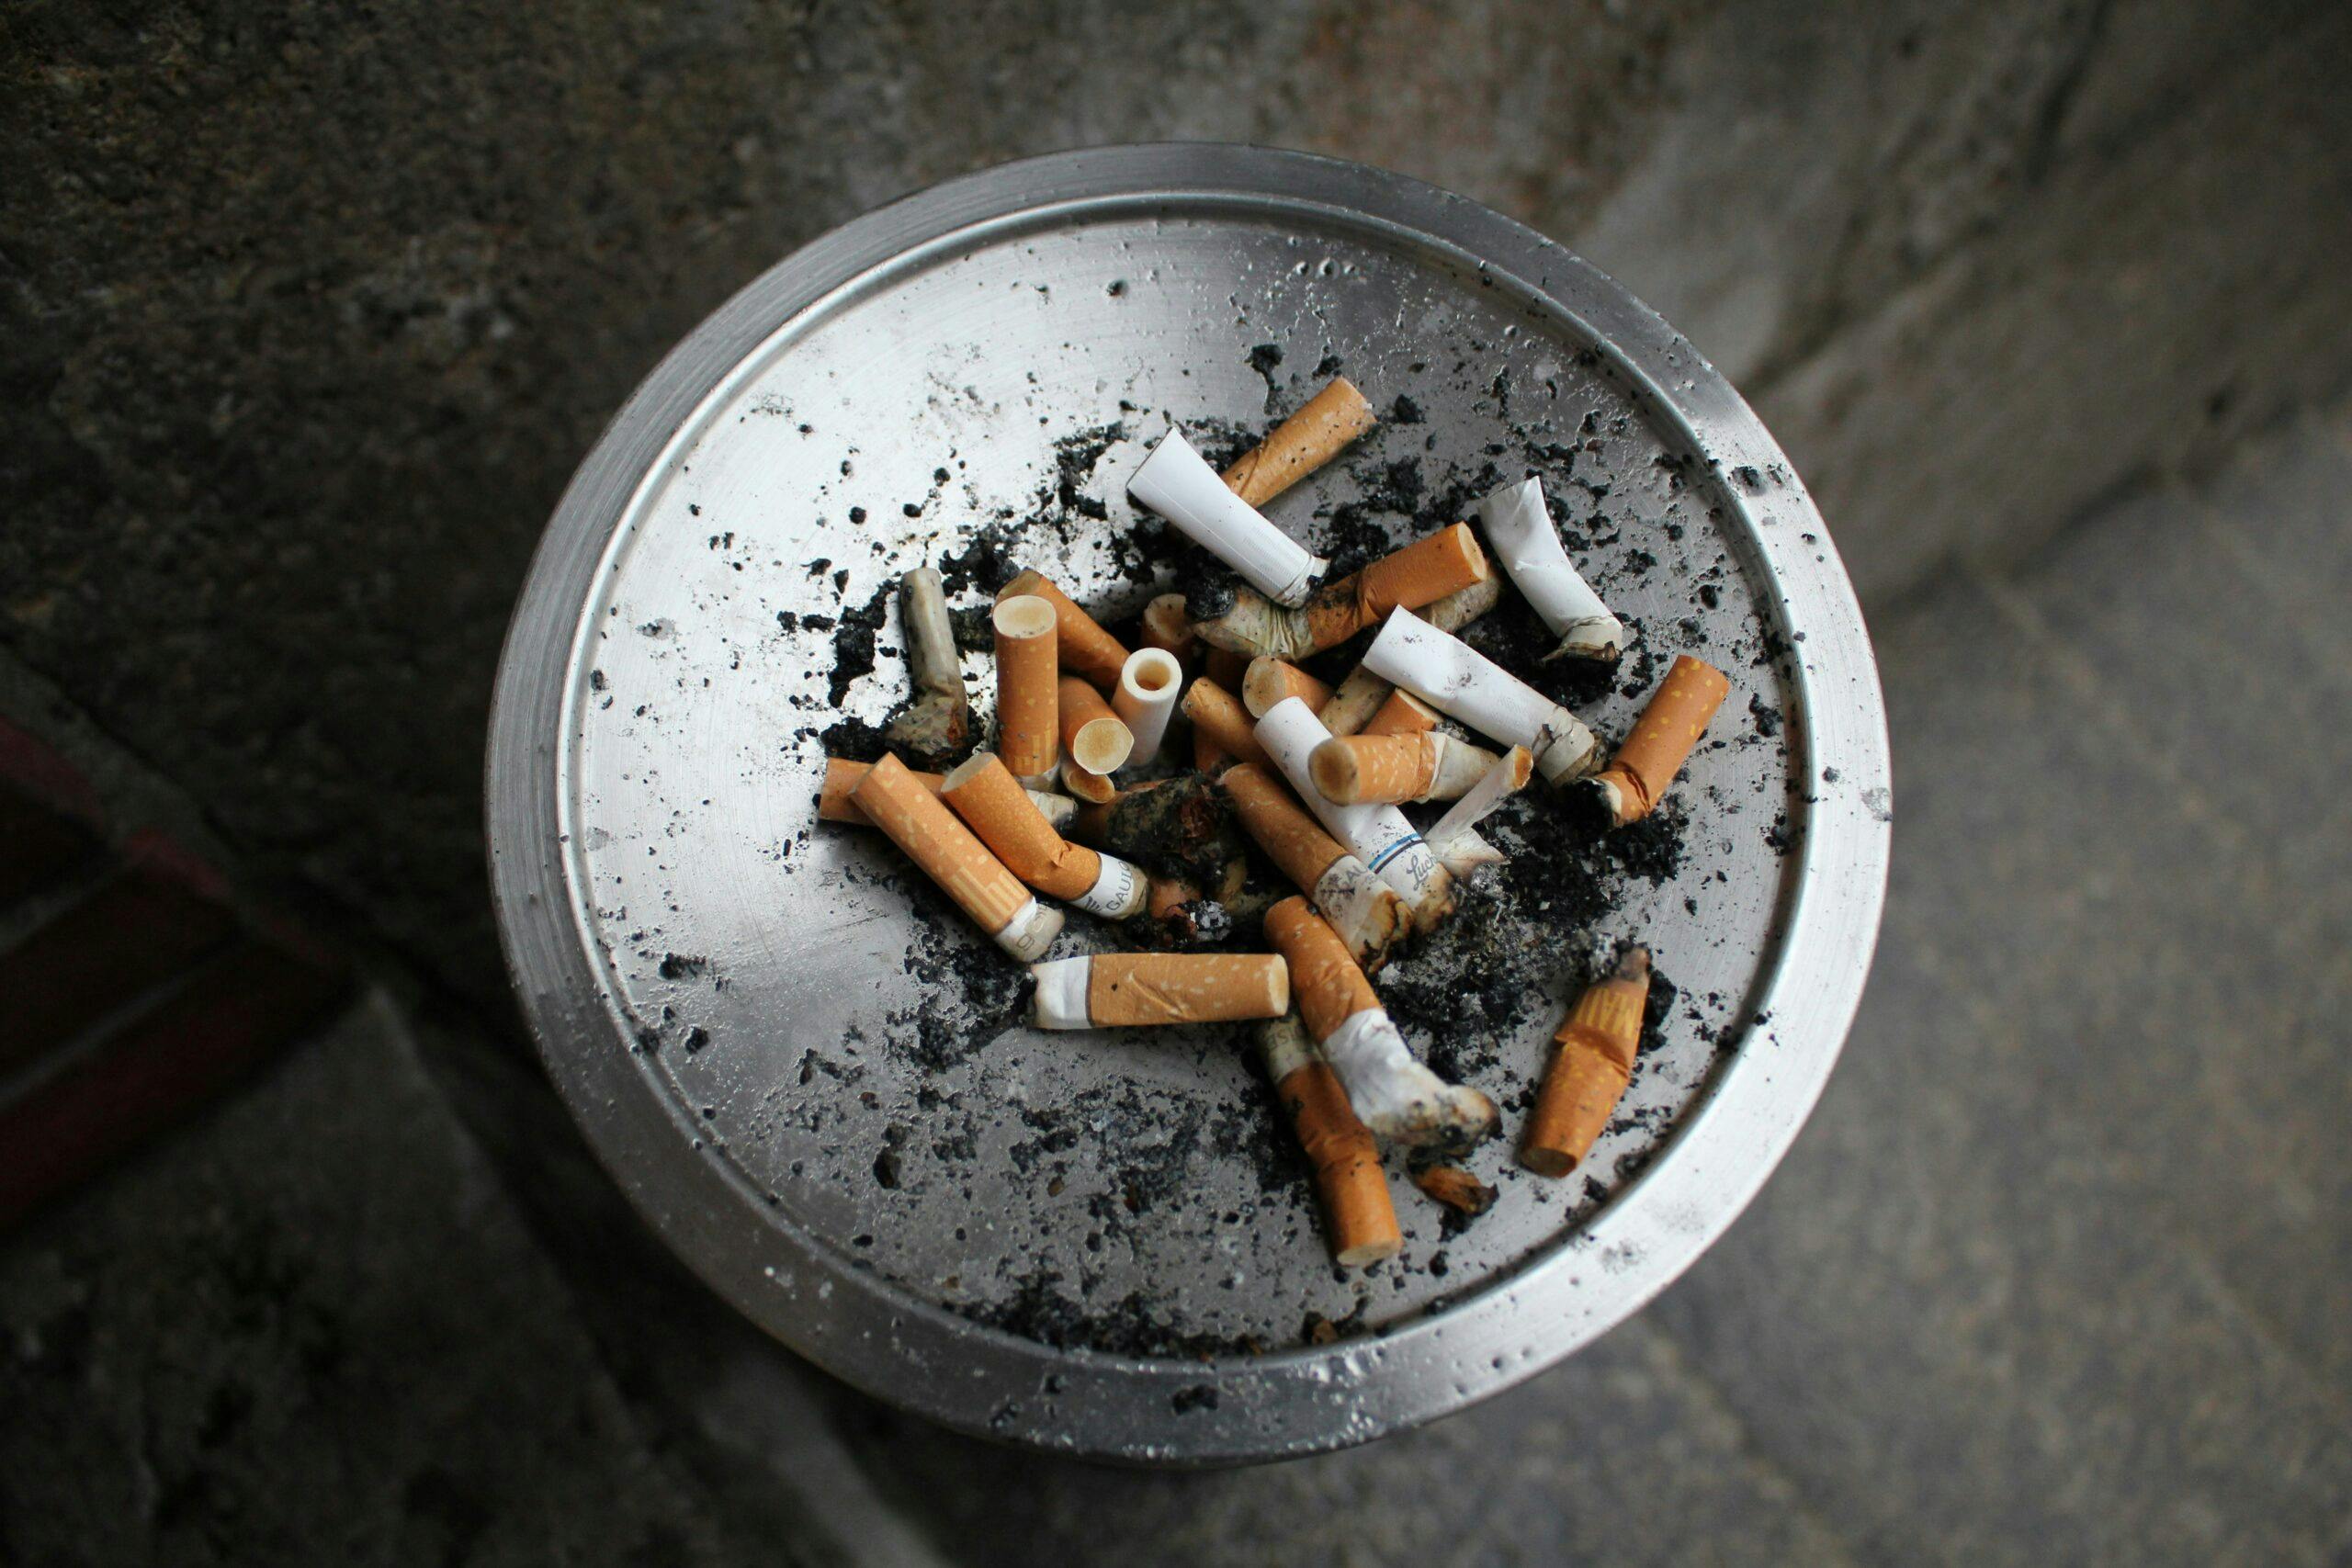 An image of cigarette butts in an ashtray.